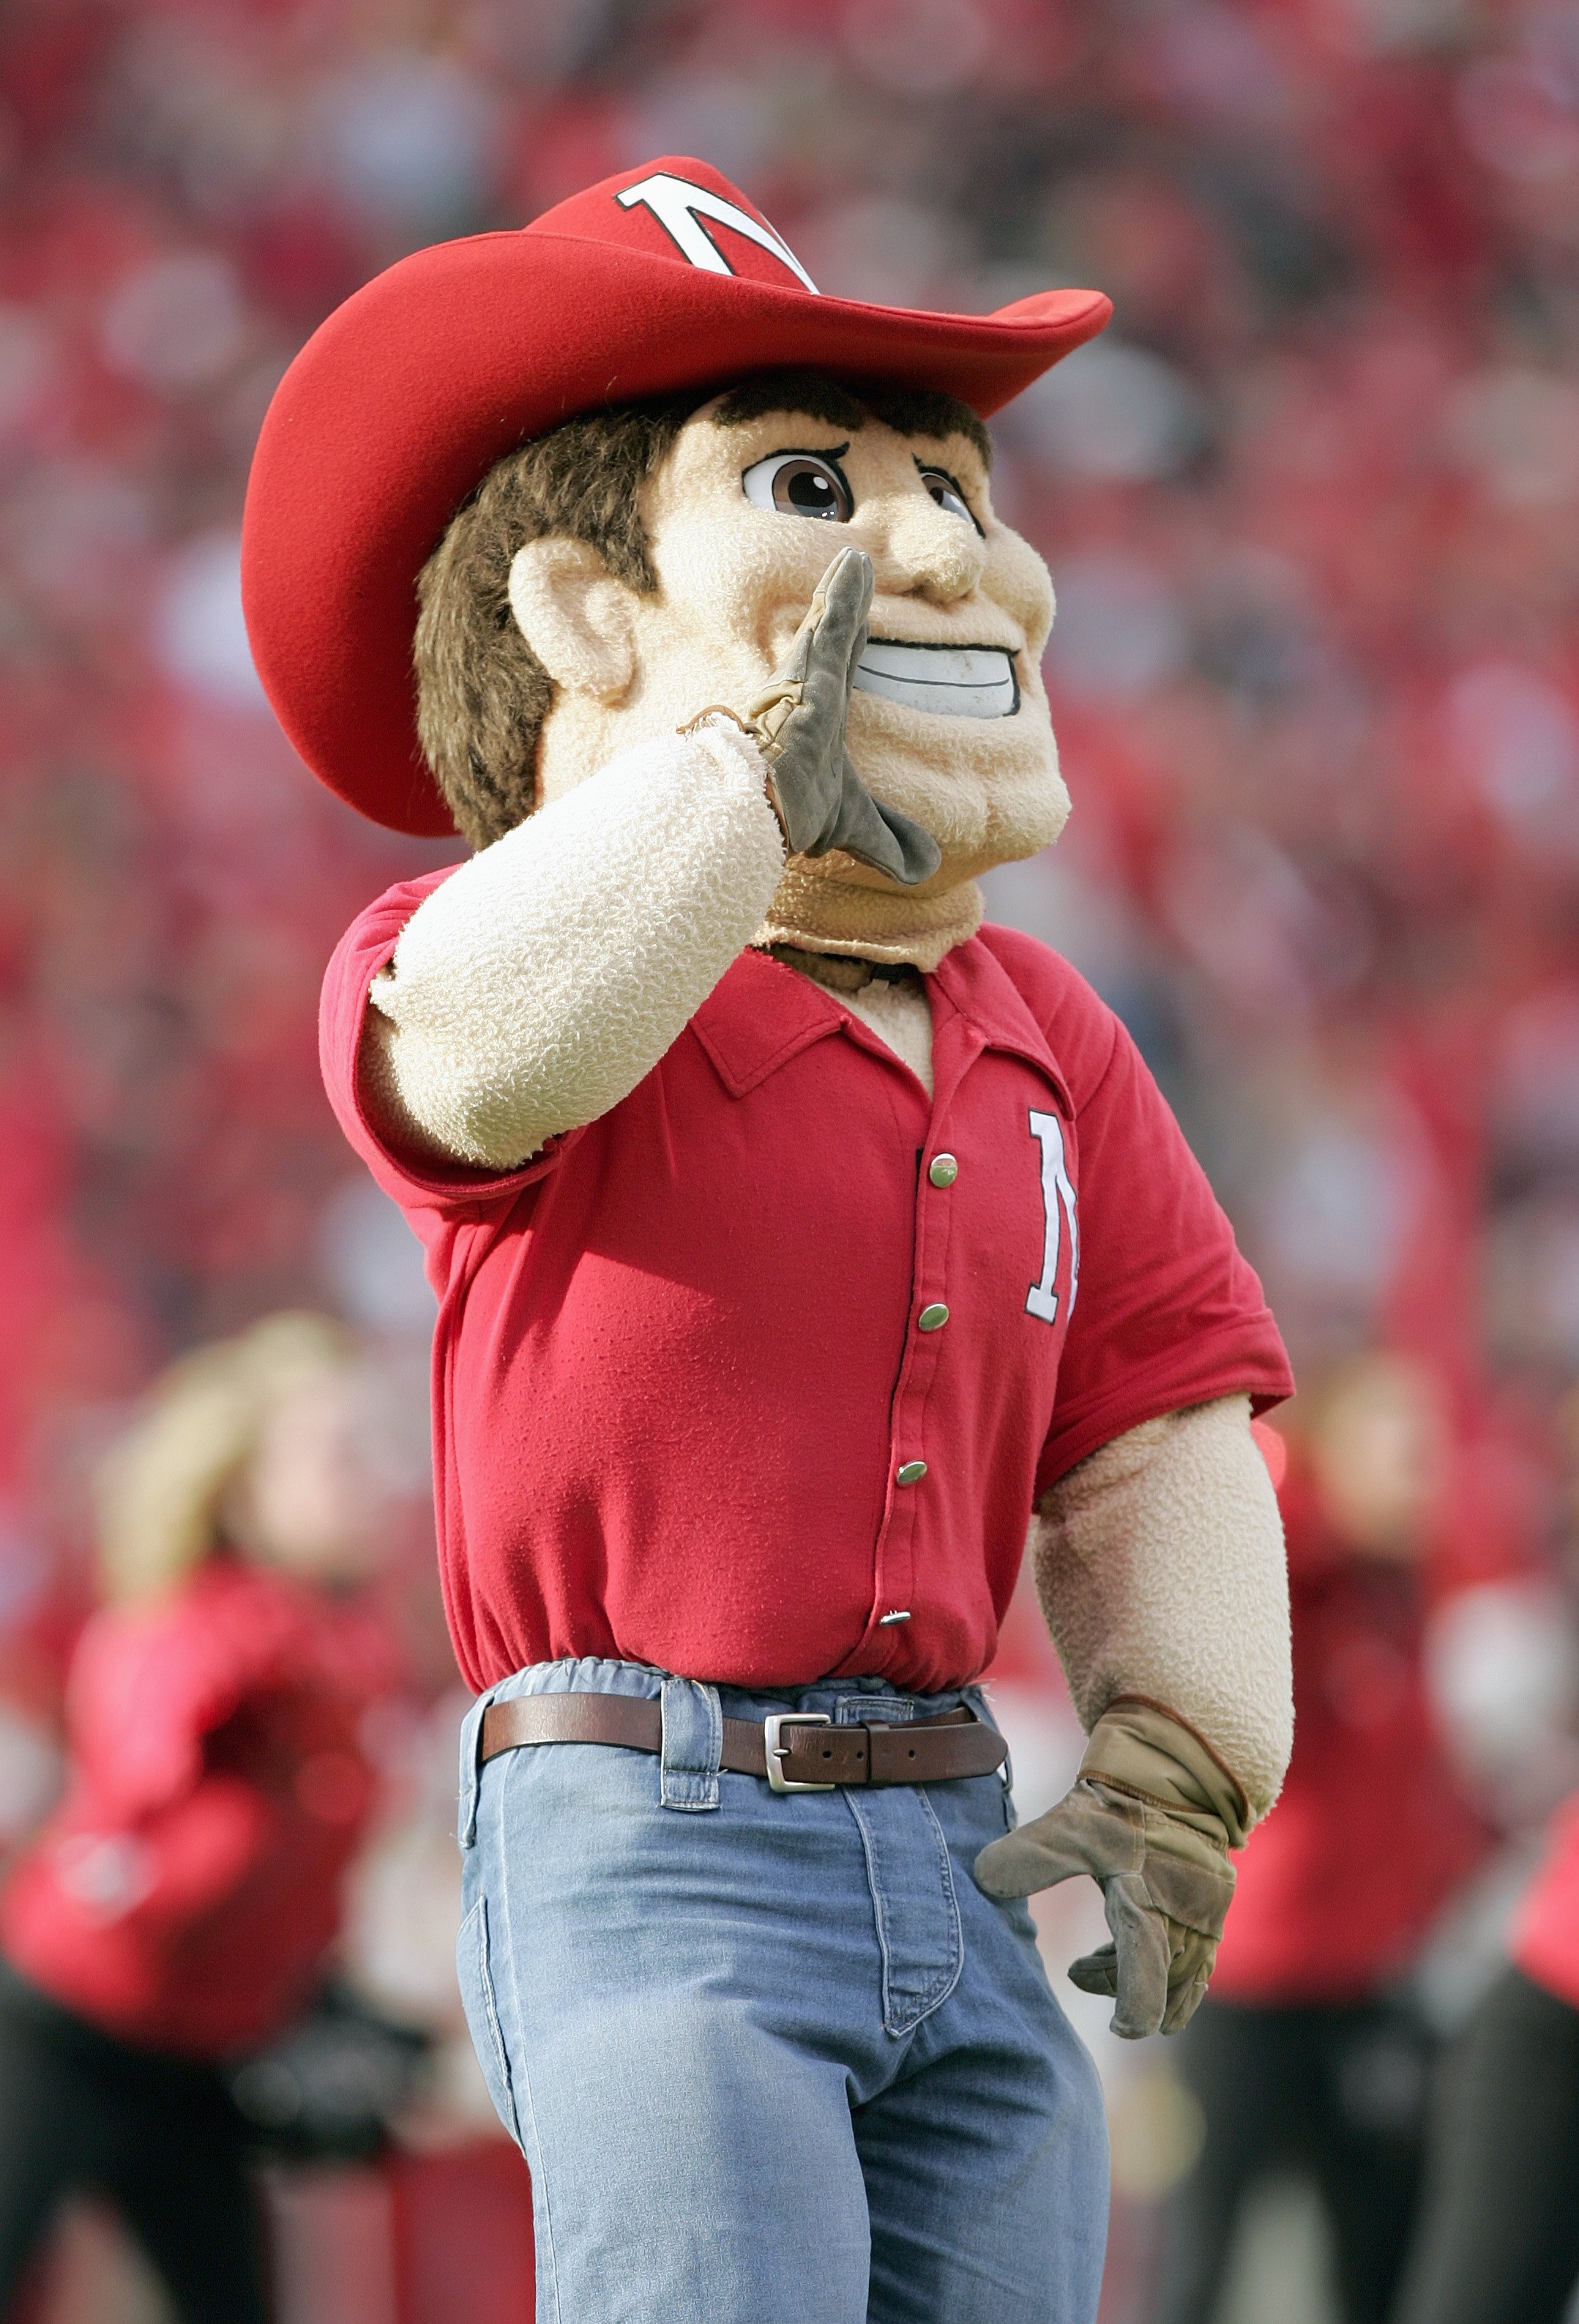 LINCOLN, NE - NOVEMBER 24:  Mascot Herbie Husker of the Nebraska Cornhuskers yells during the game against the Colorado Buffaloes on November 24, 2006 at Memorial Stadium in Lincoln, Nebraska. Nebraska won 37-14. (Photo by Brian Bahr/Getty Images)